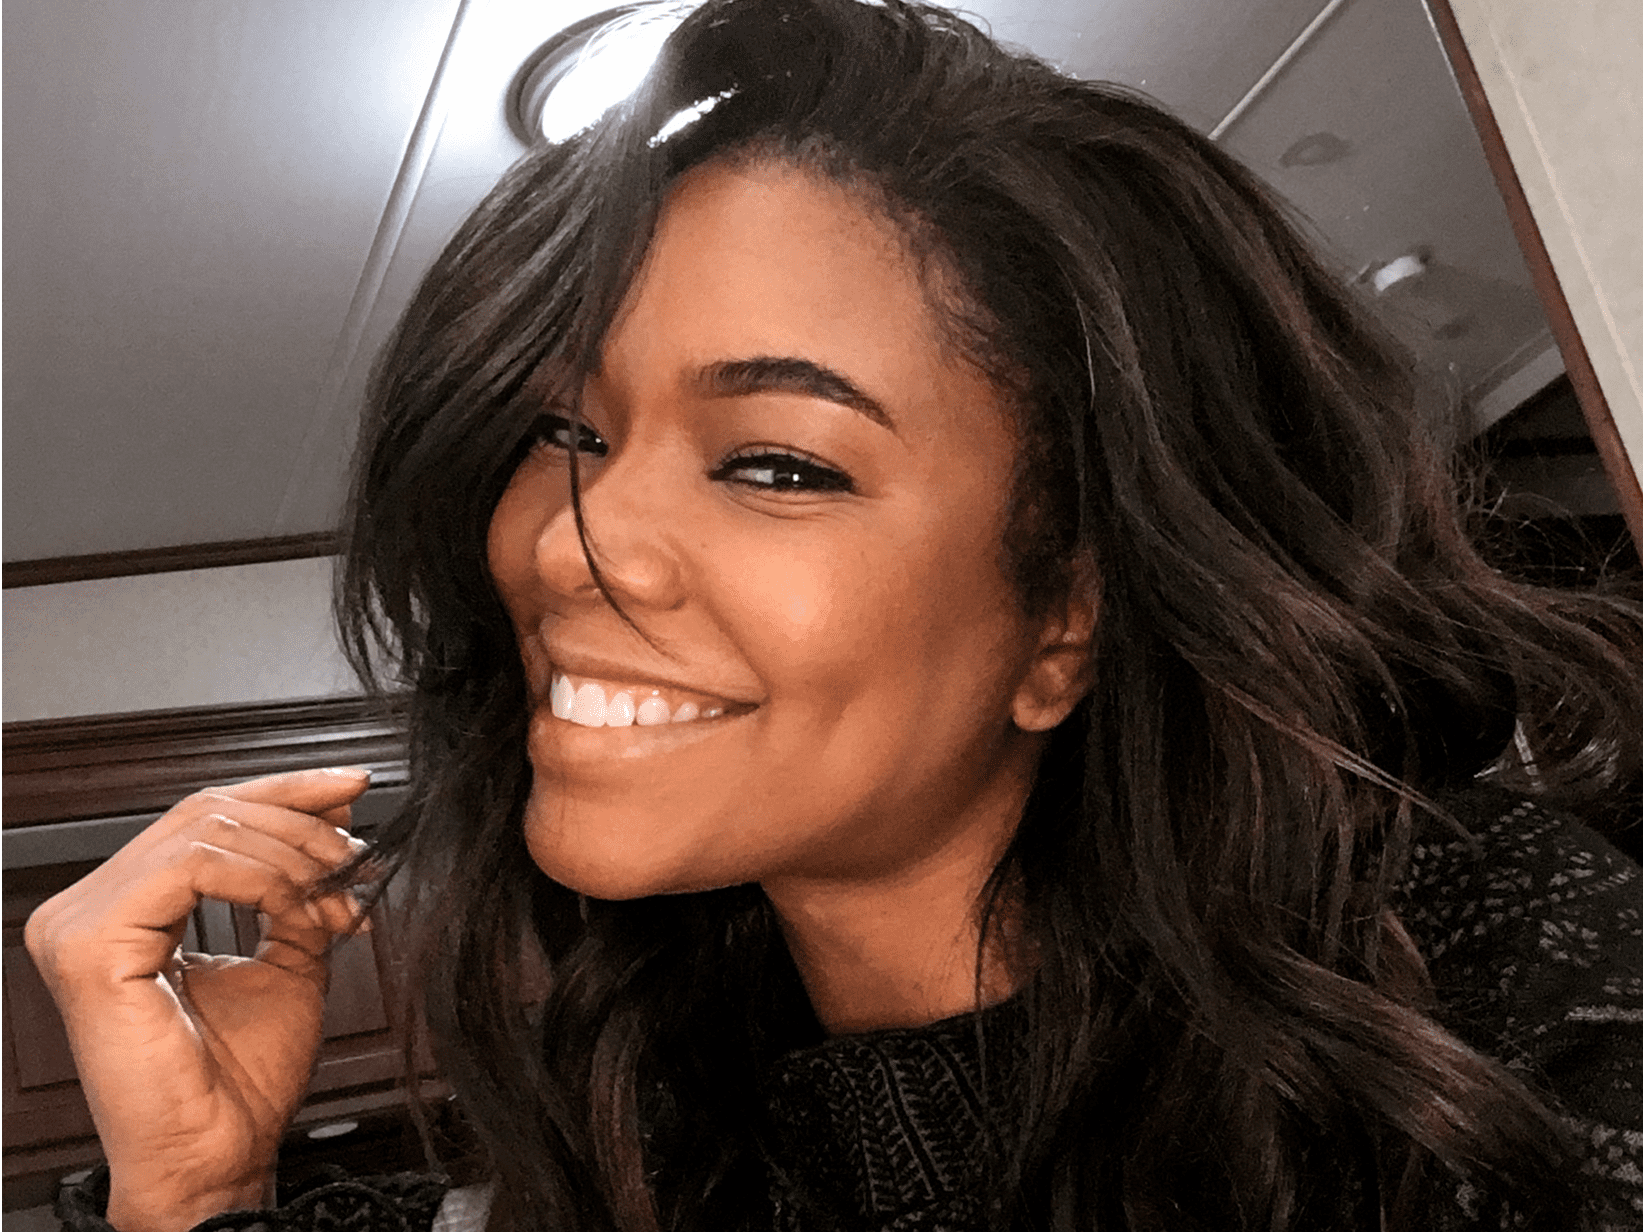 gabrielle-unions-vacay-photos-and-footage-will-make-your-day